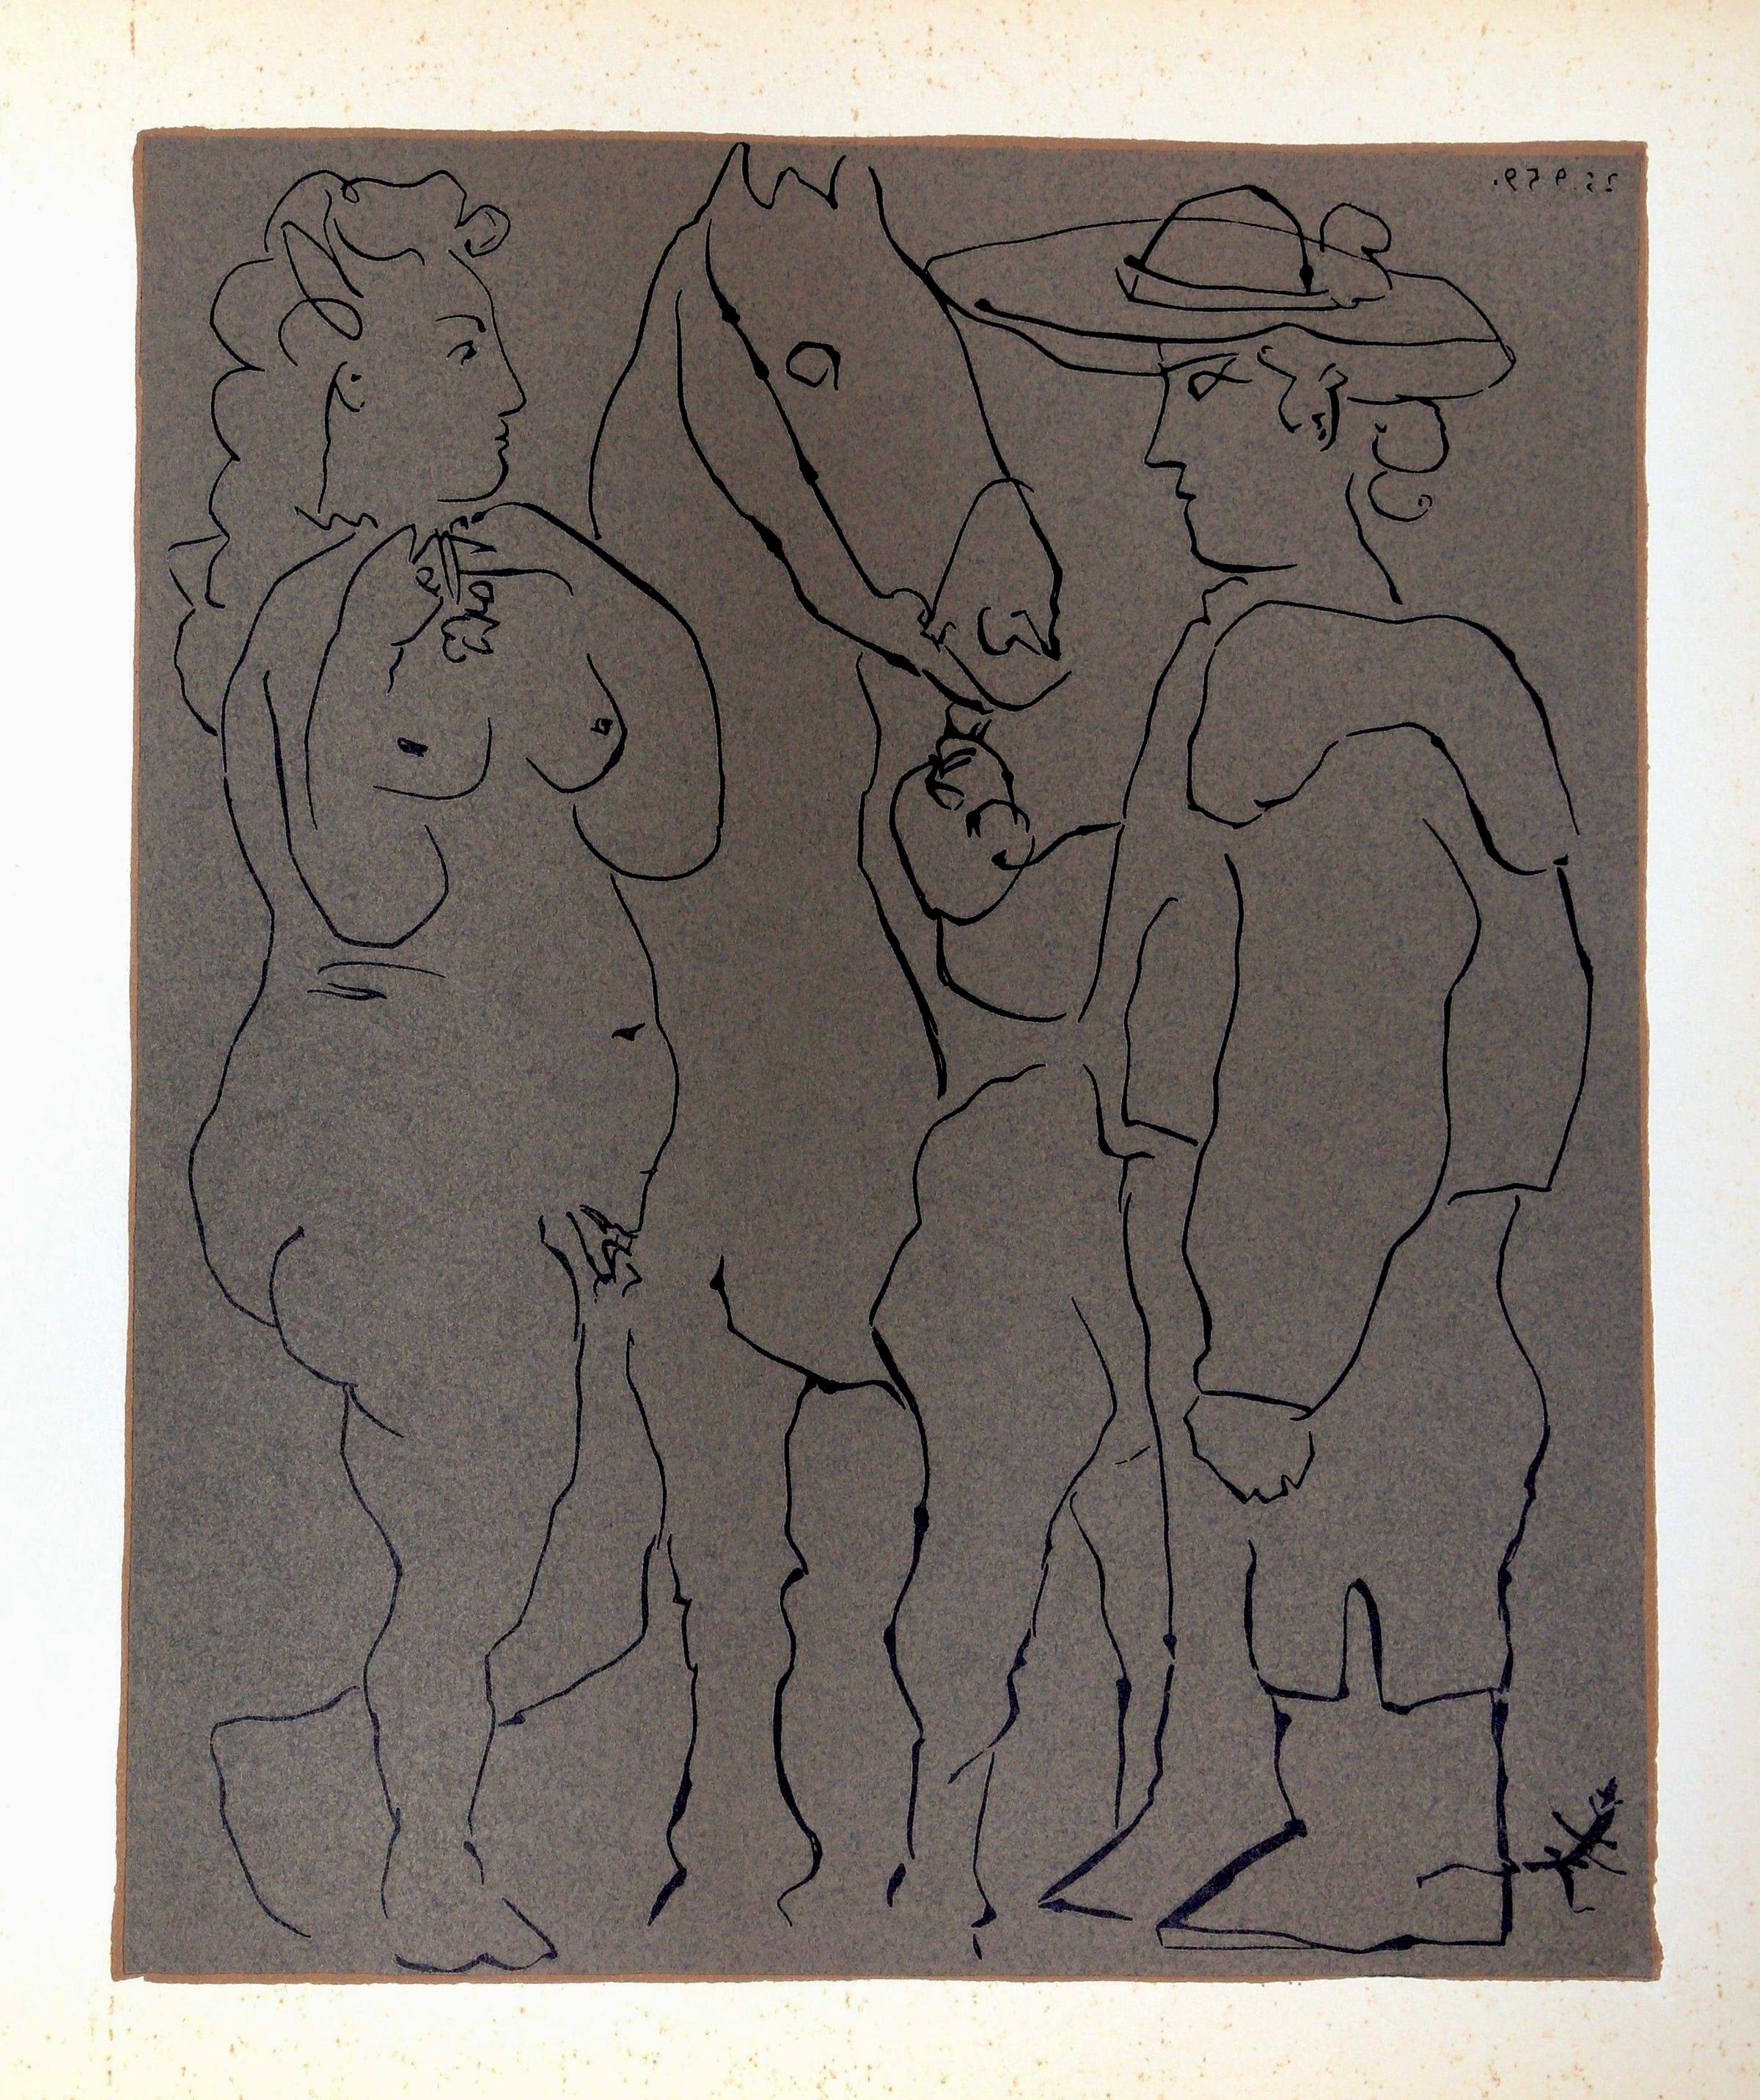 Picasso, Picador, Woman, and Horse, Pablo Picasso-Linogravures (after) For Sale 5